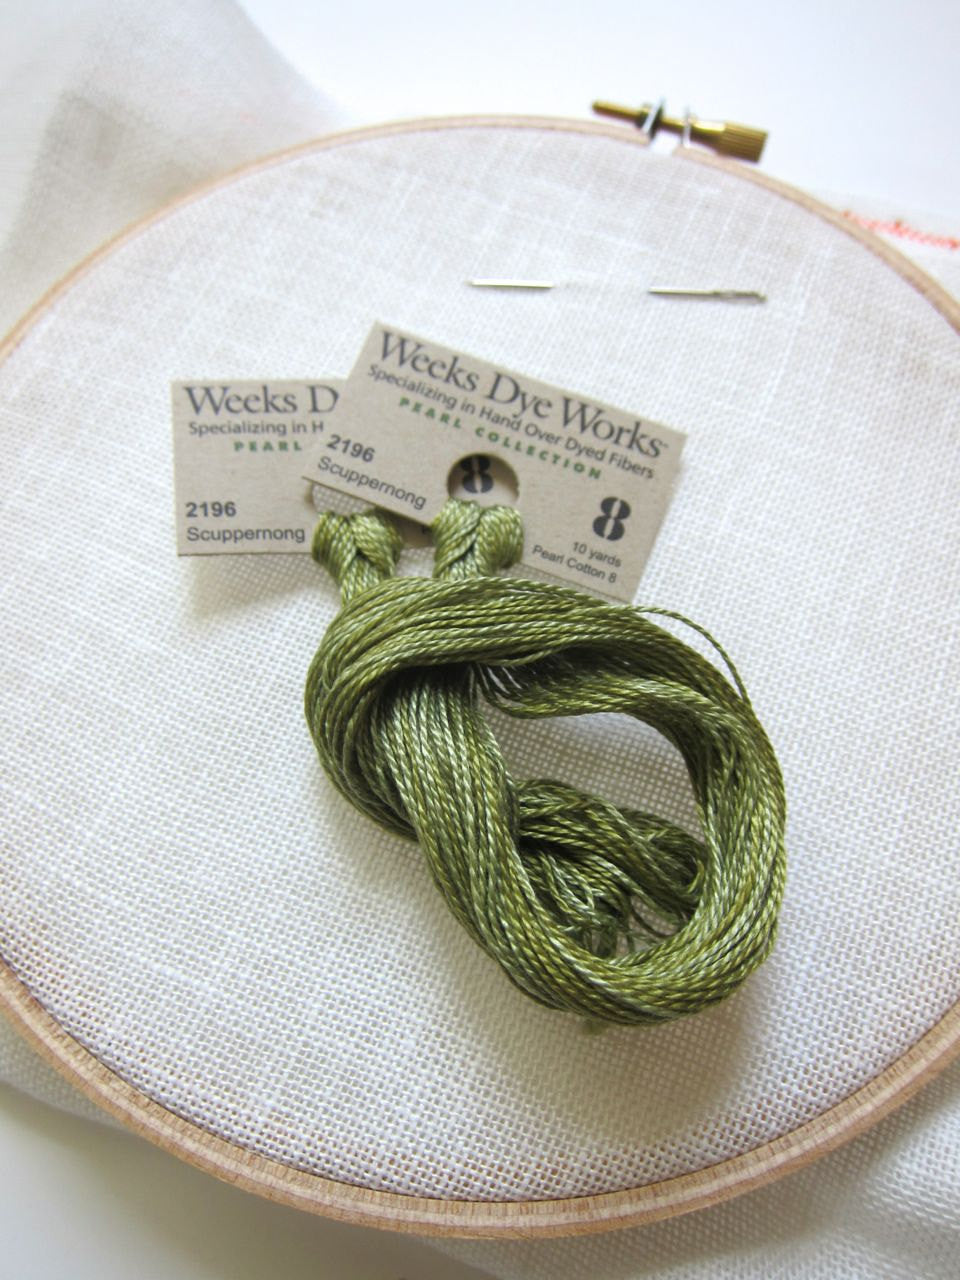 Pearl Cotton Thread - Weeks Dye Works Scuppernong (2196) Size 8 Perle Cotton - Snuggly Monkey